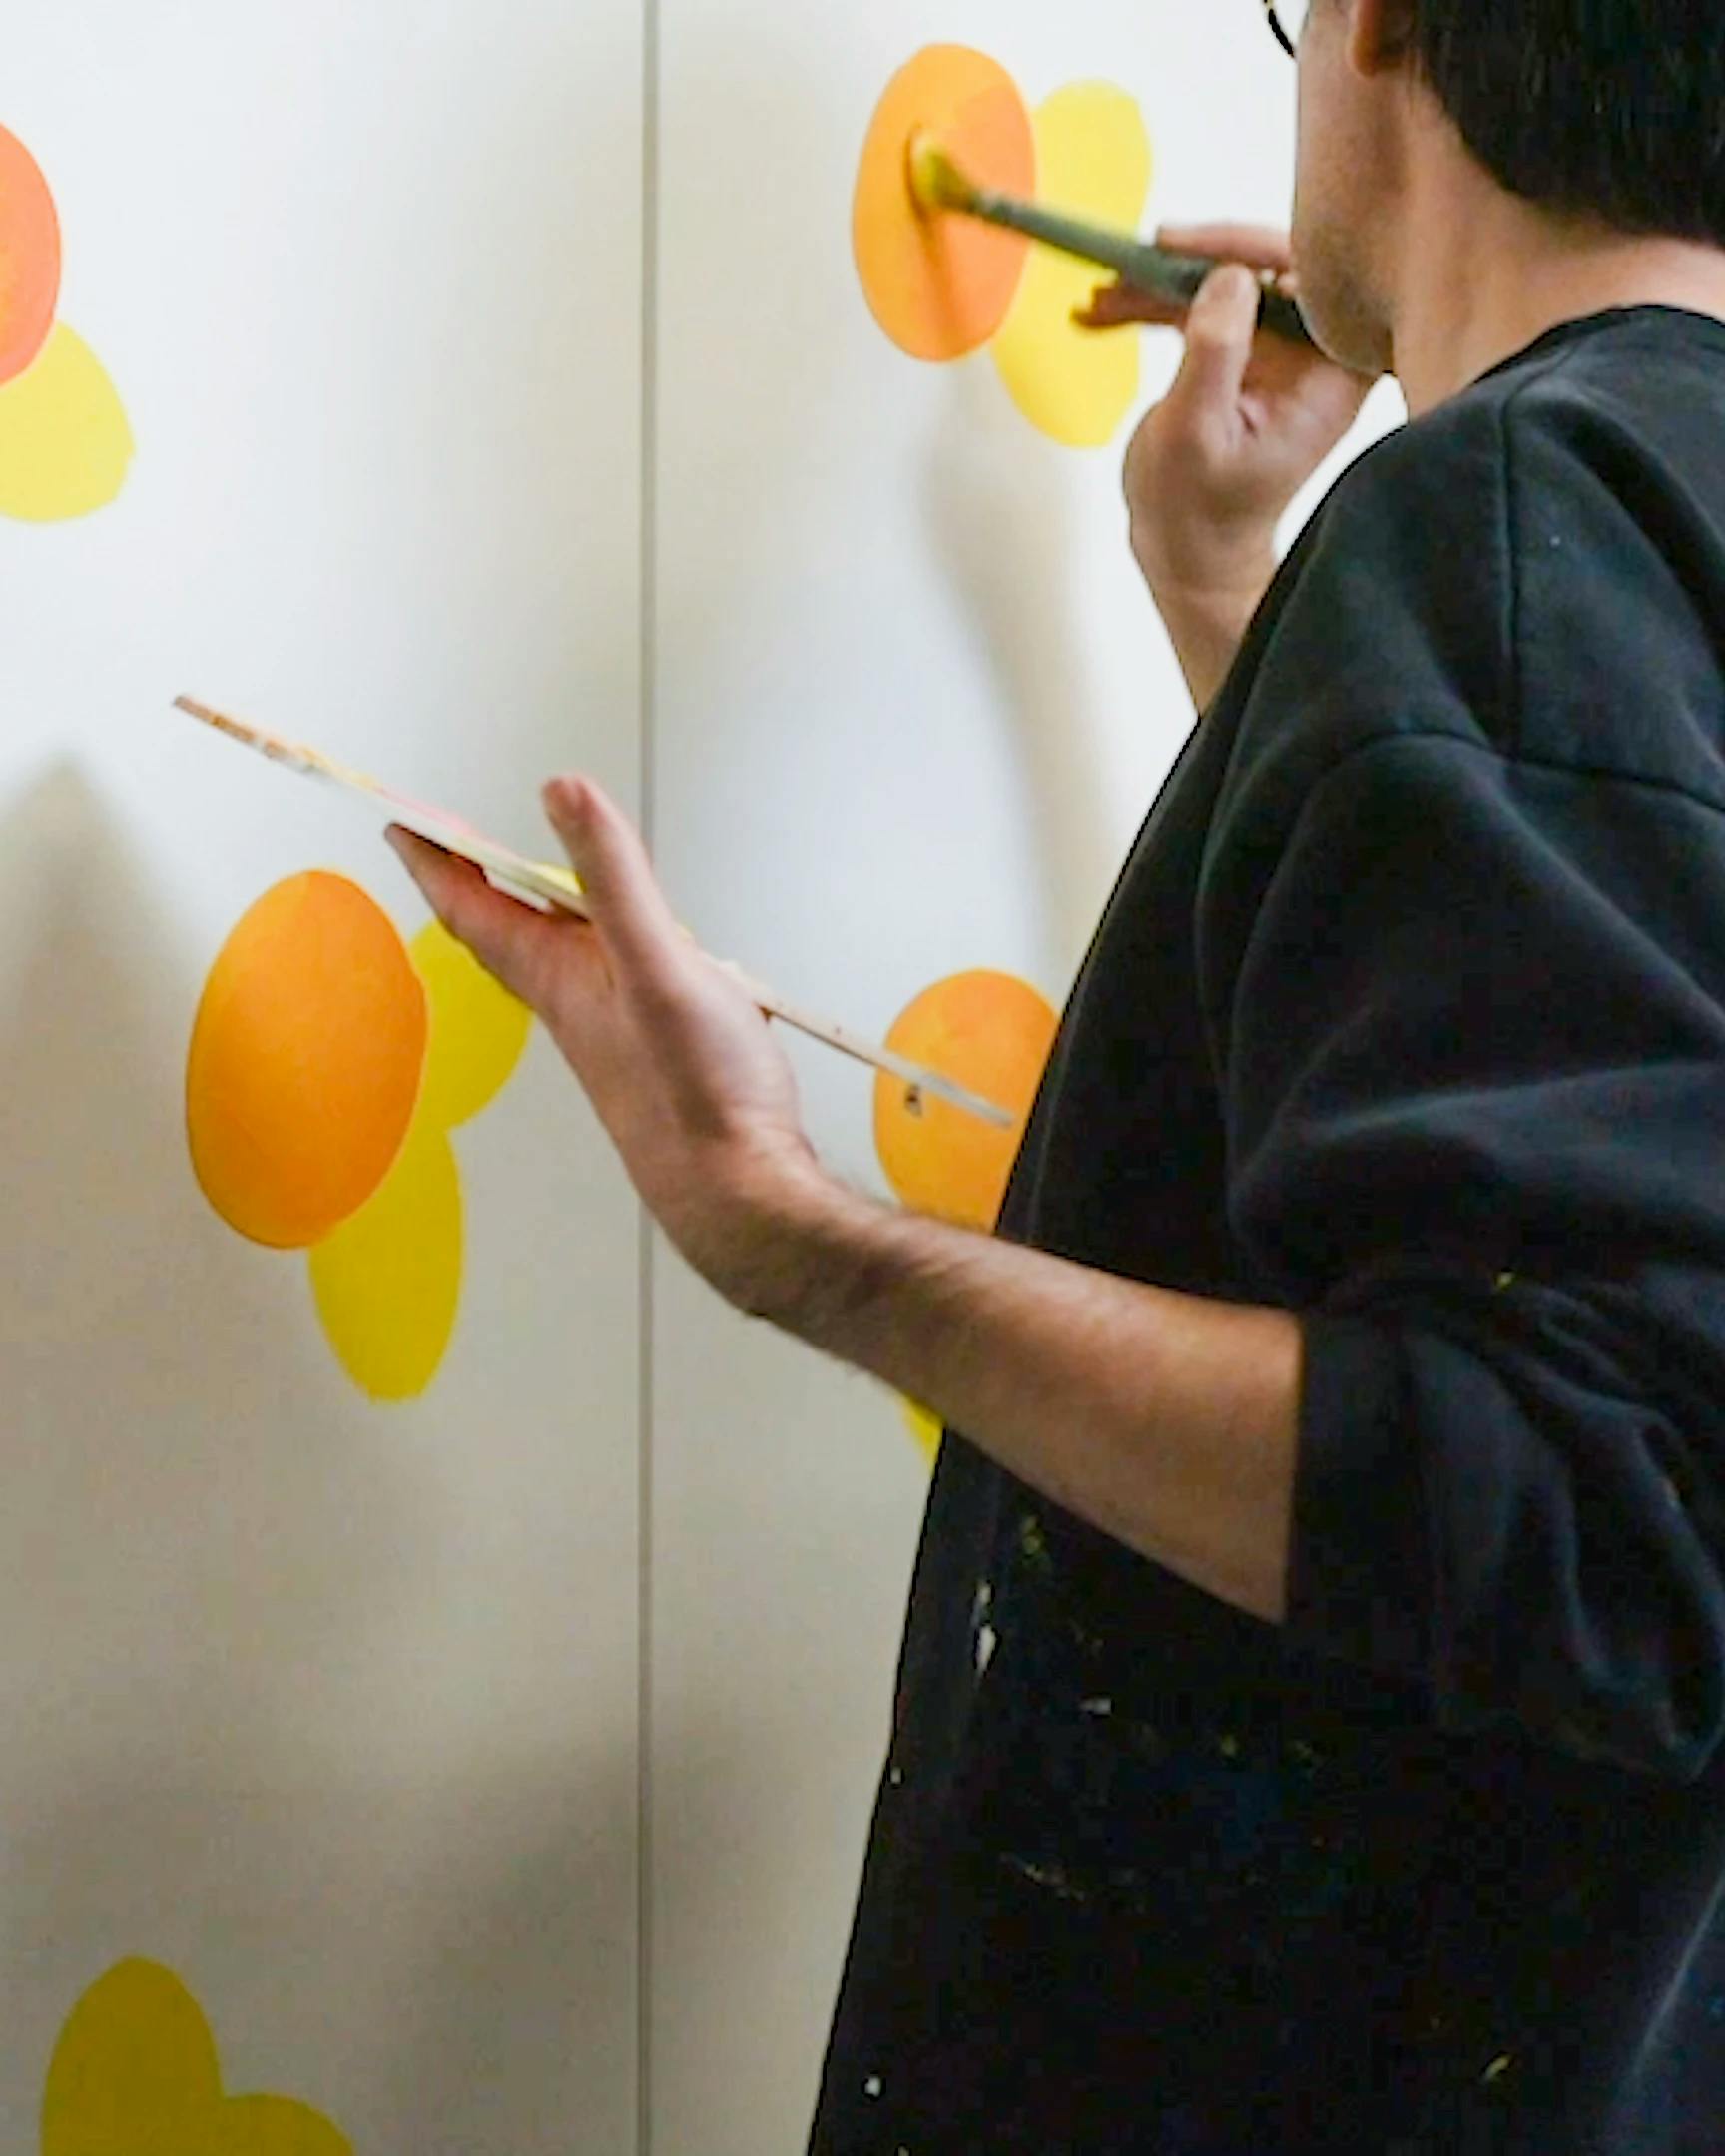 Artist Erin D. Garcia working on painting of oranges for exhibition Group 5